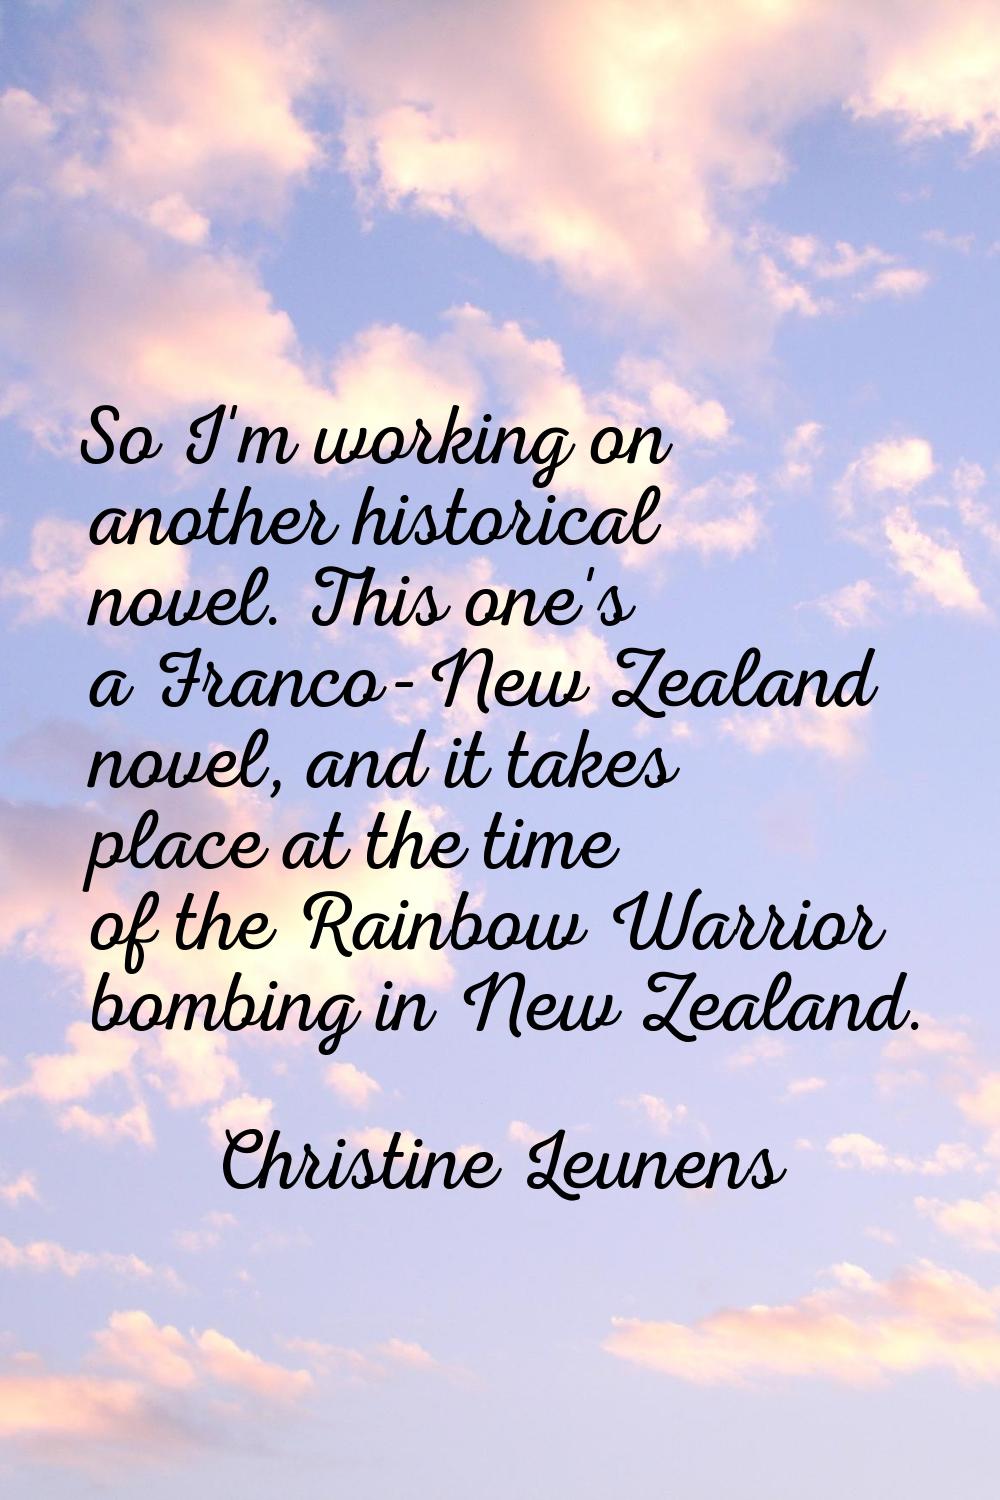 So I'm working on another historical novel. This one's a Franco-New Zealand novel, and it takes pla